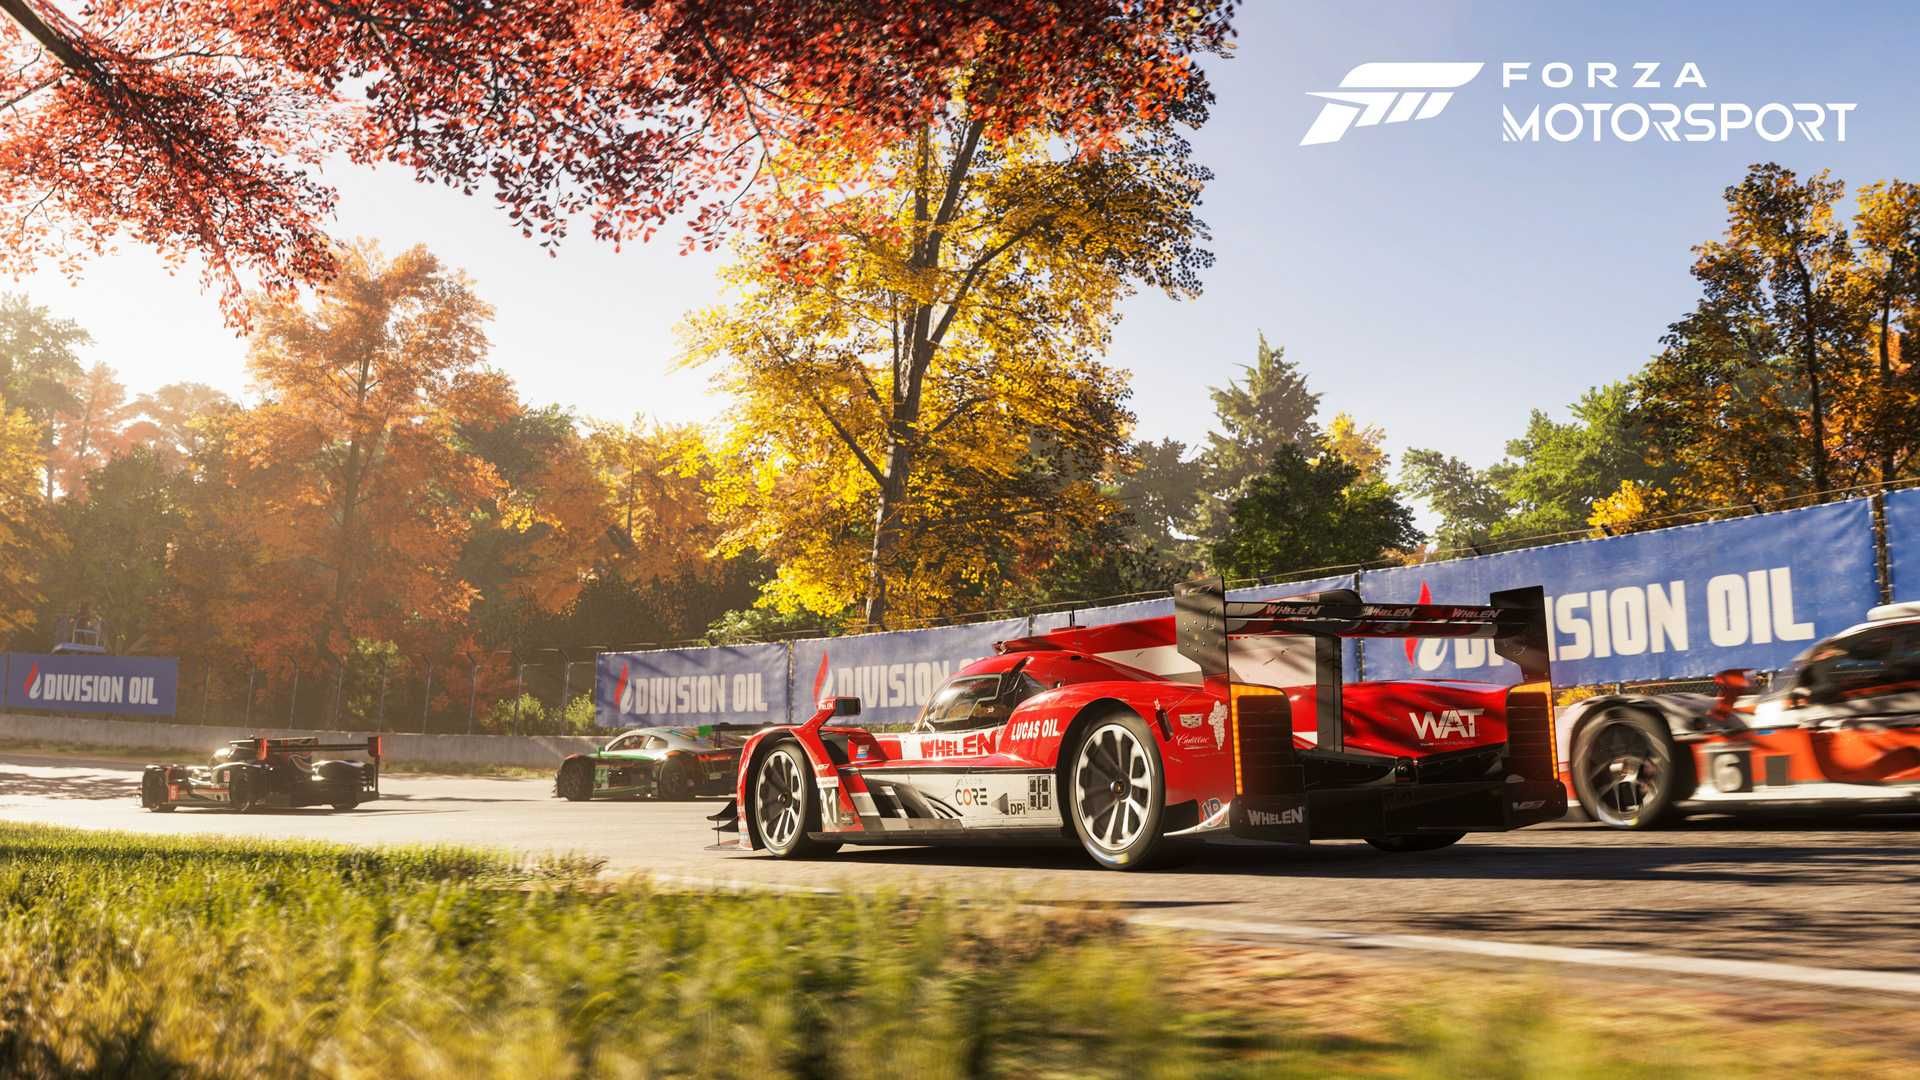 Forza Motorsport Coming Back to Xbox/PC More Realistic Than Ever